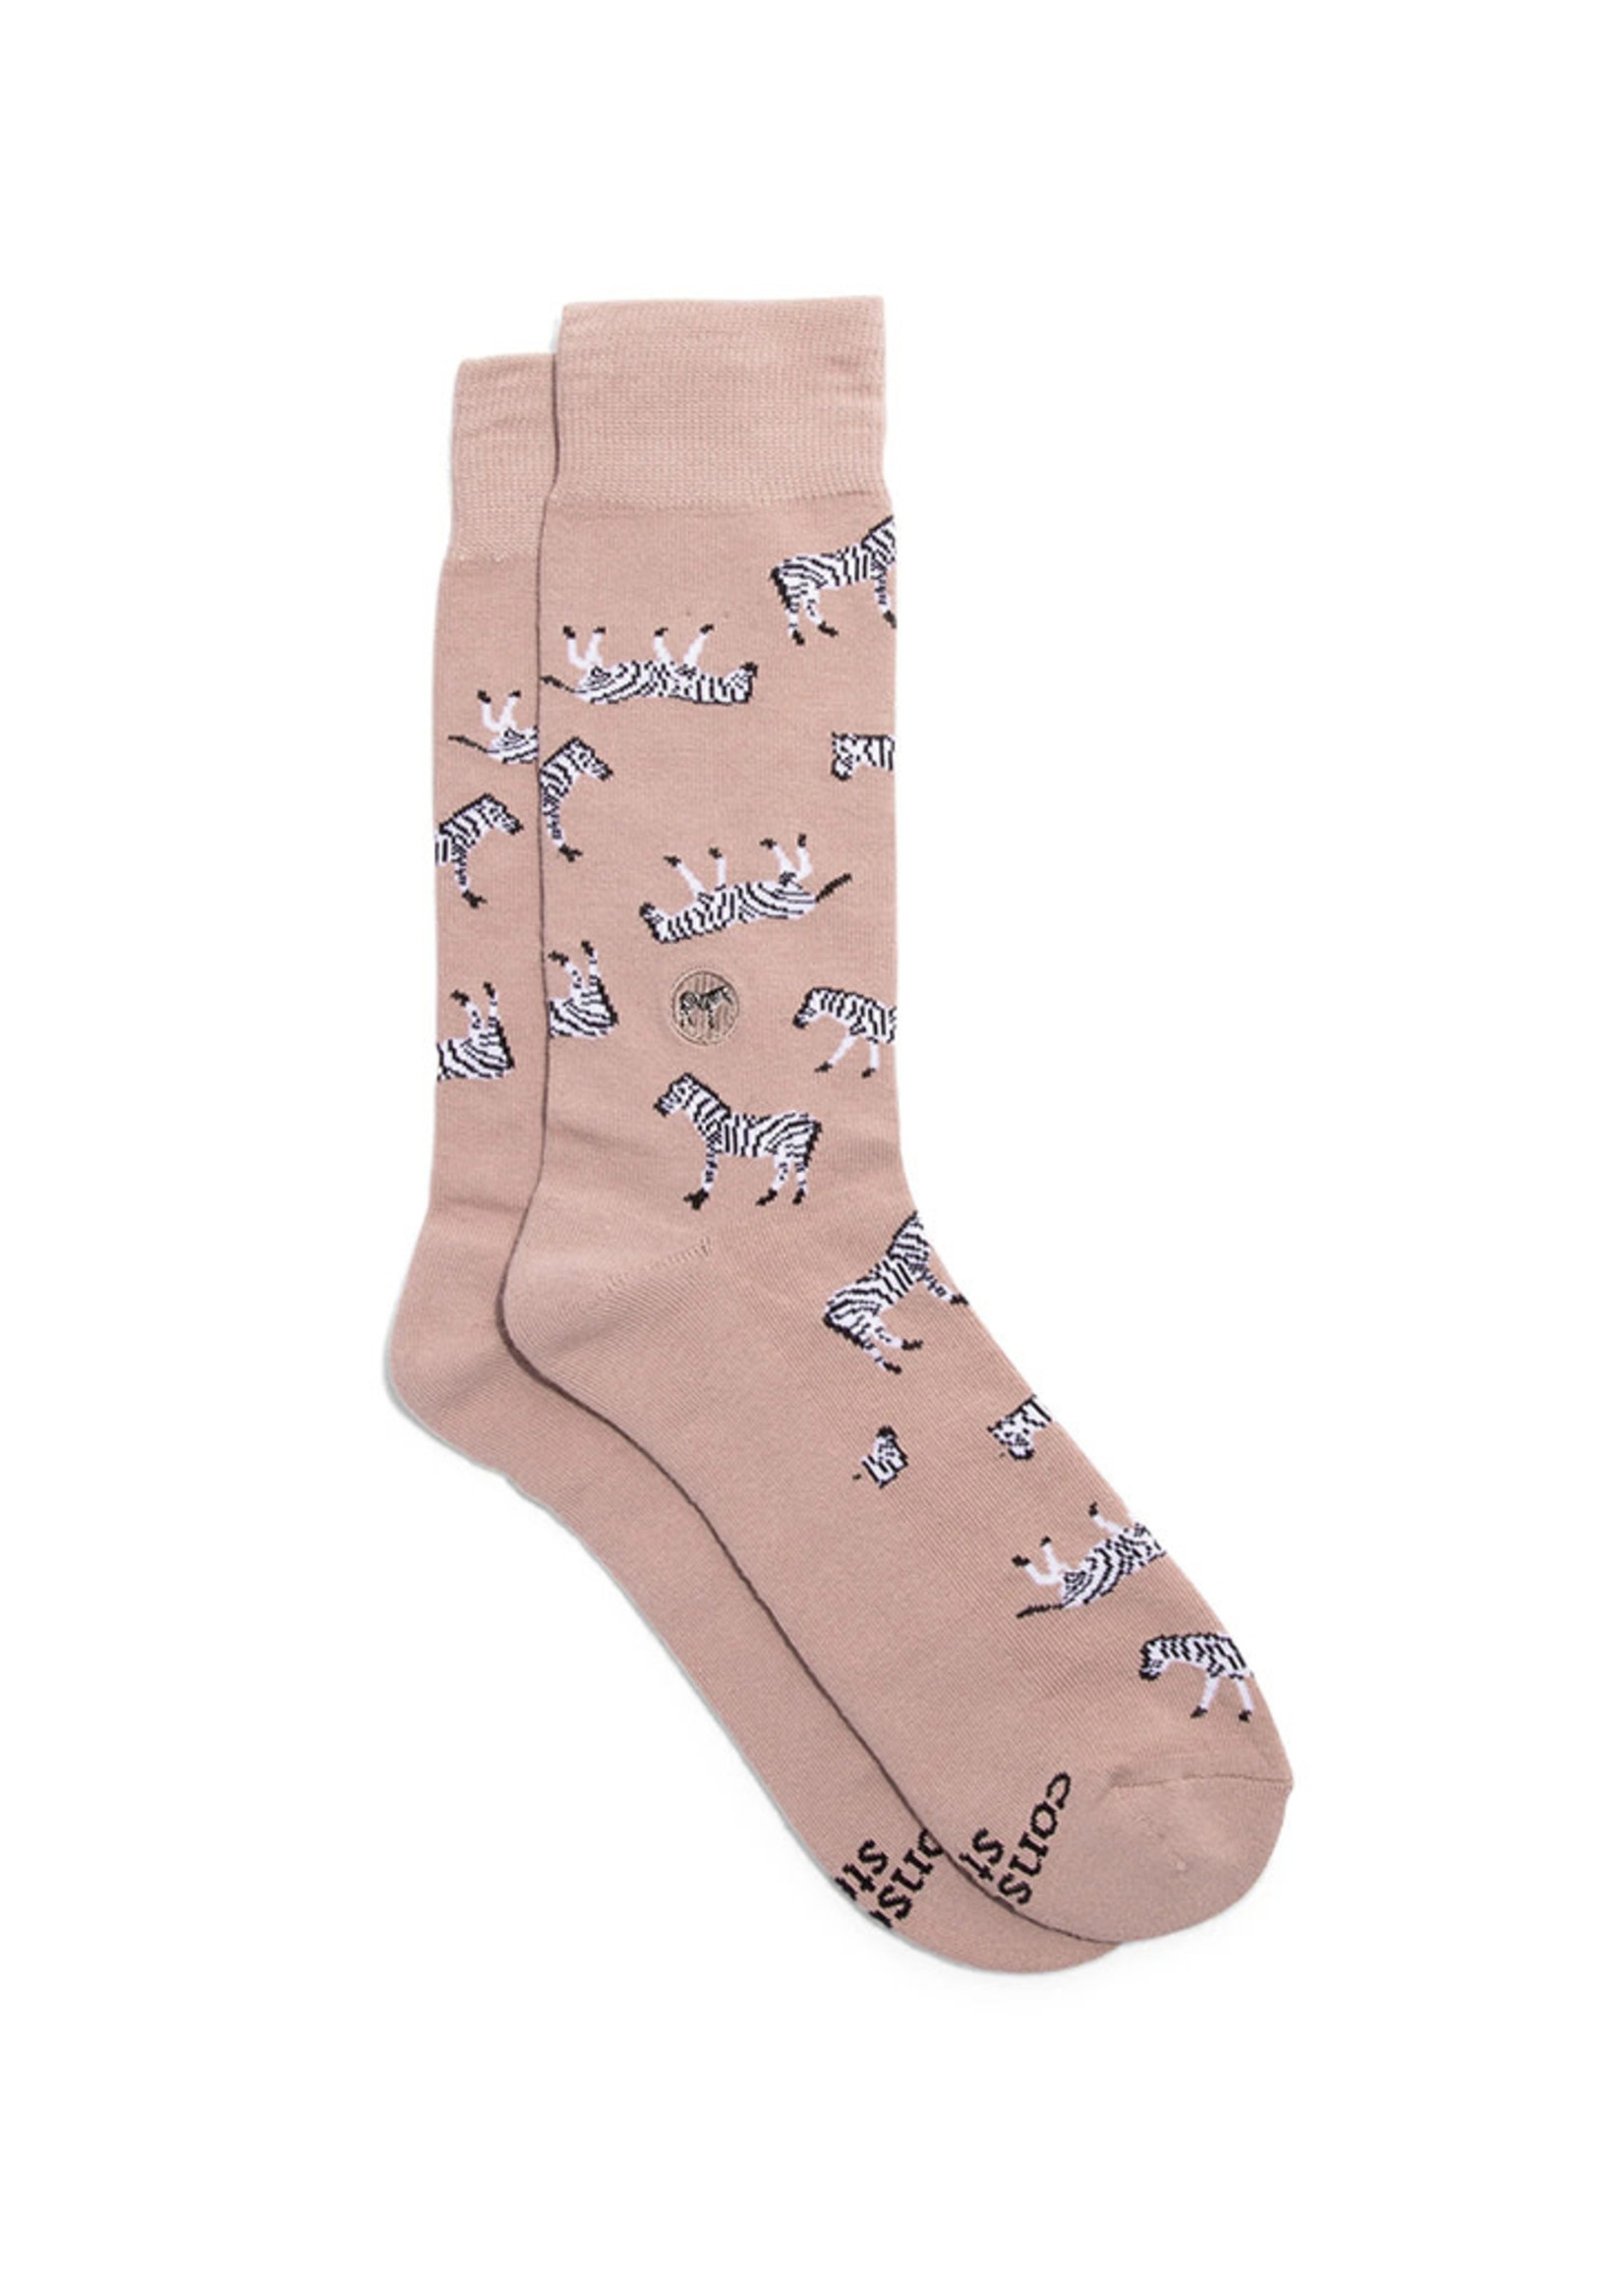 Conscious Step Women's Socks That Protect Zebras